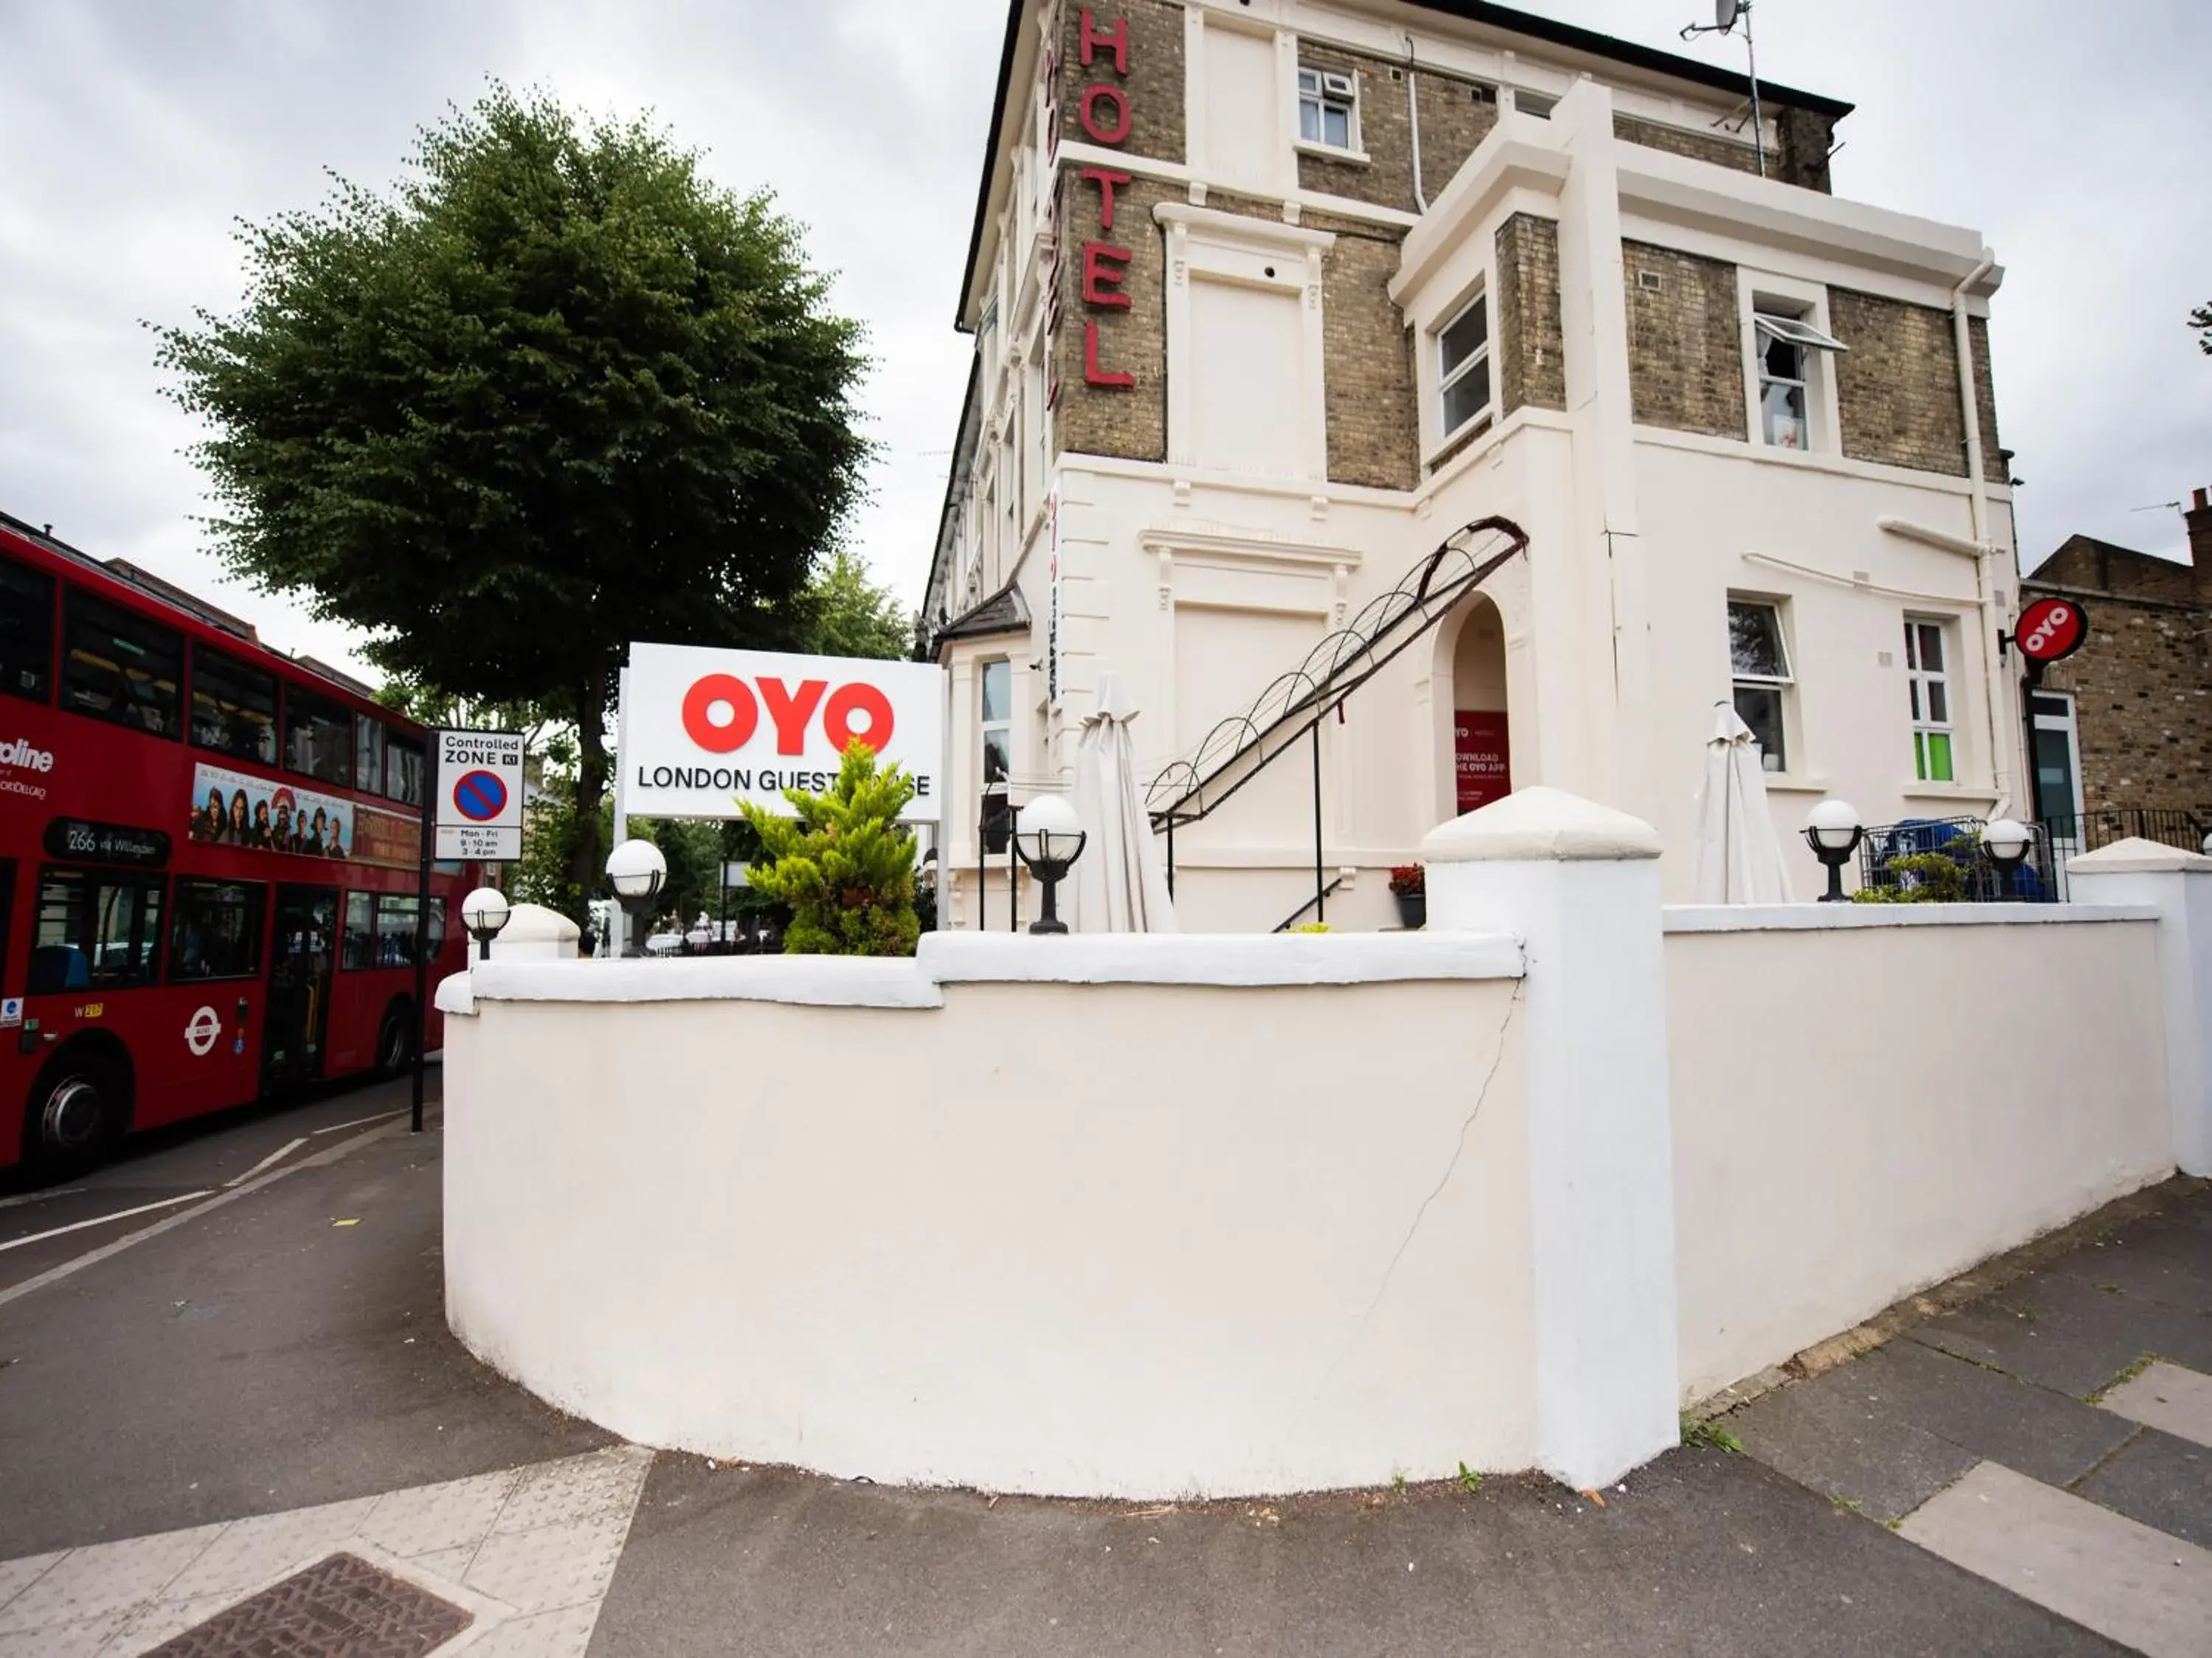 Property Building in OYO London Guest House